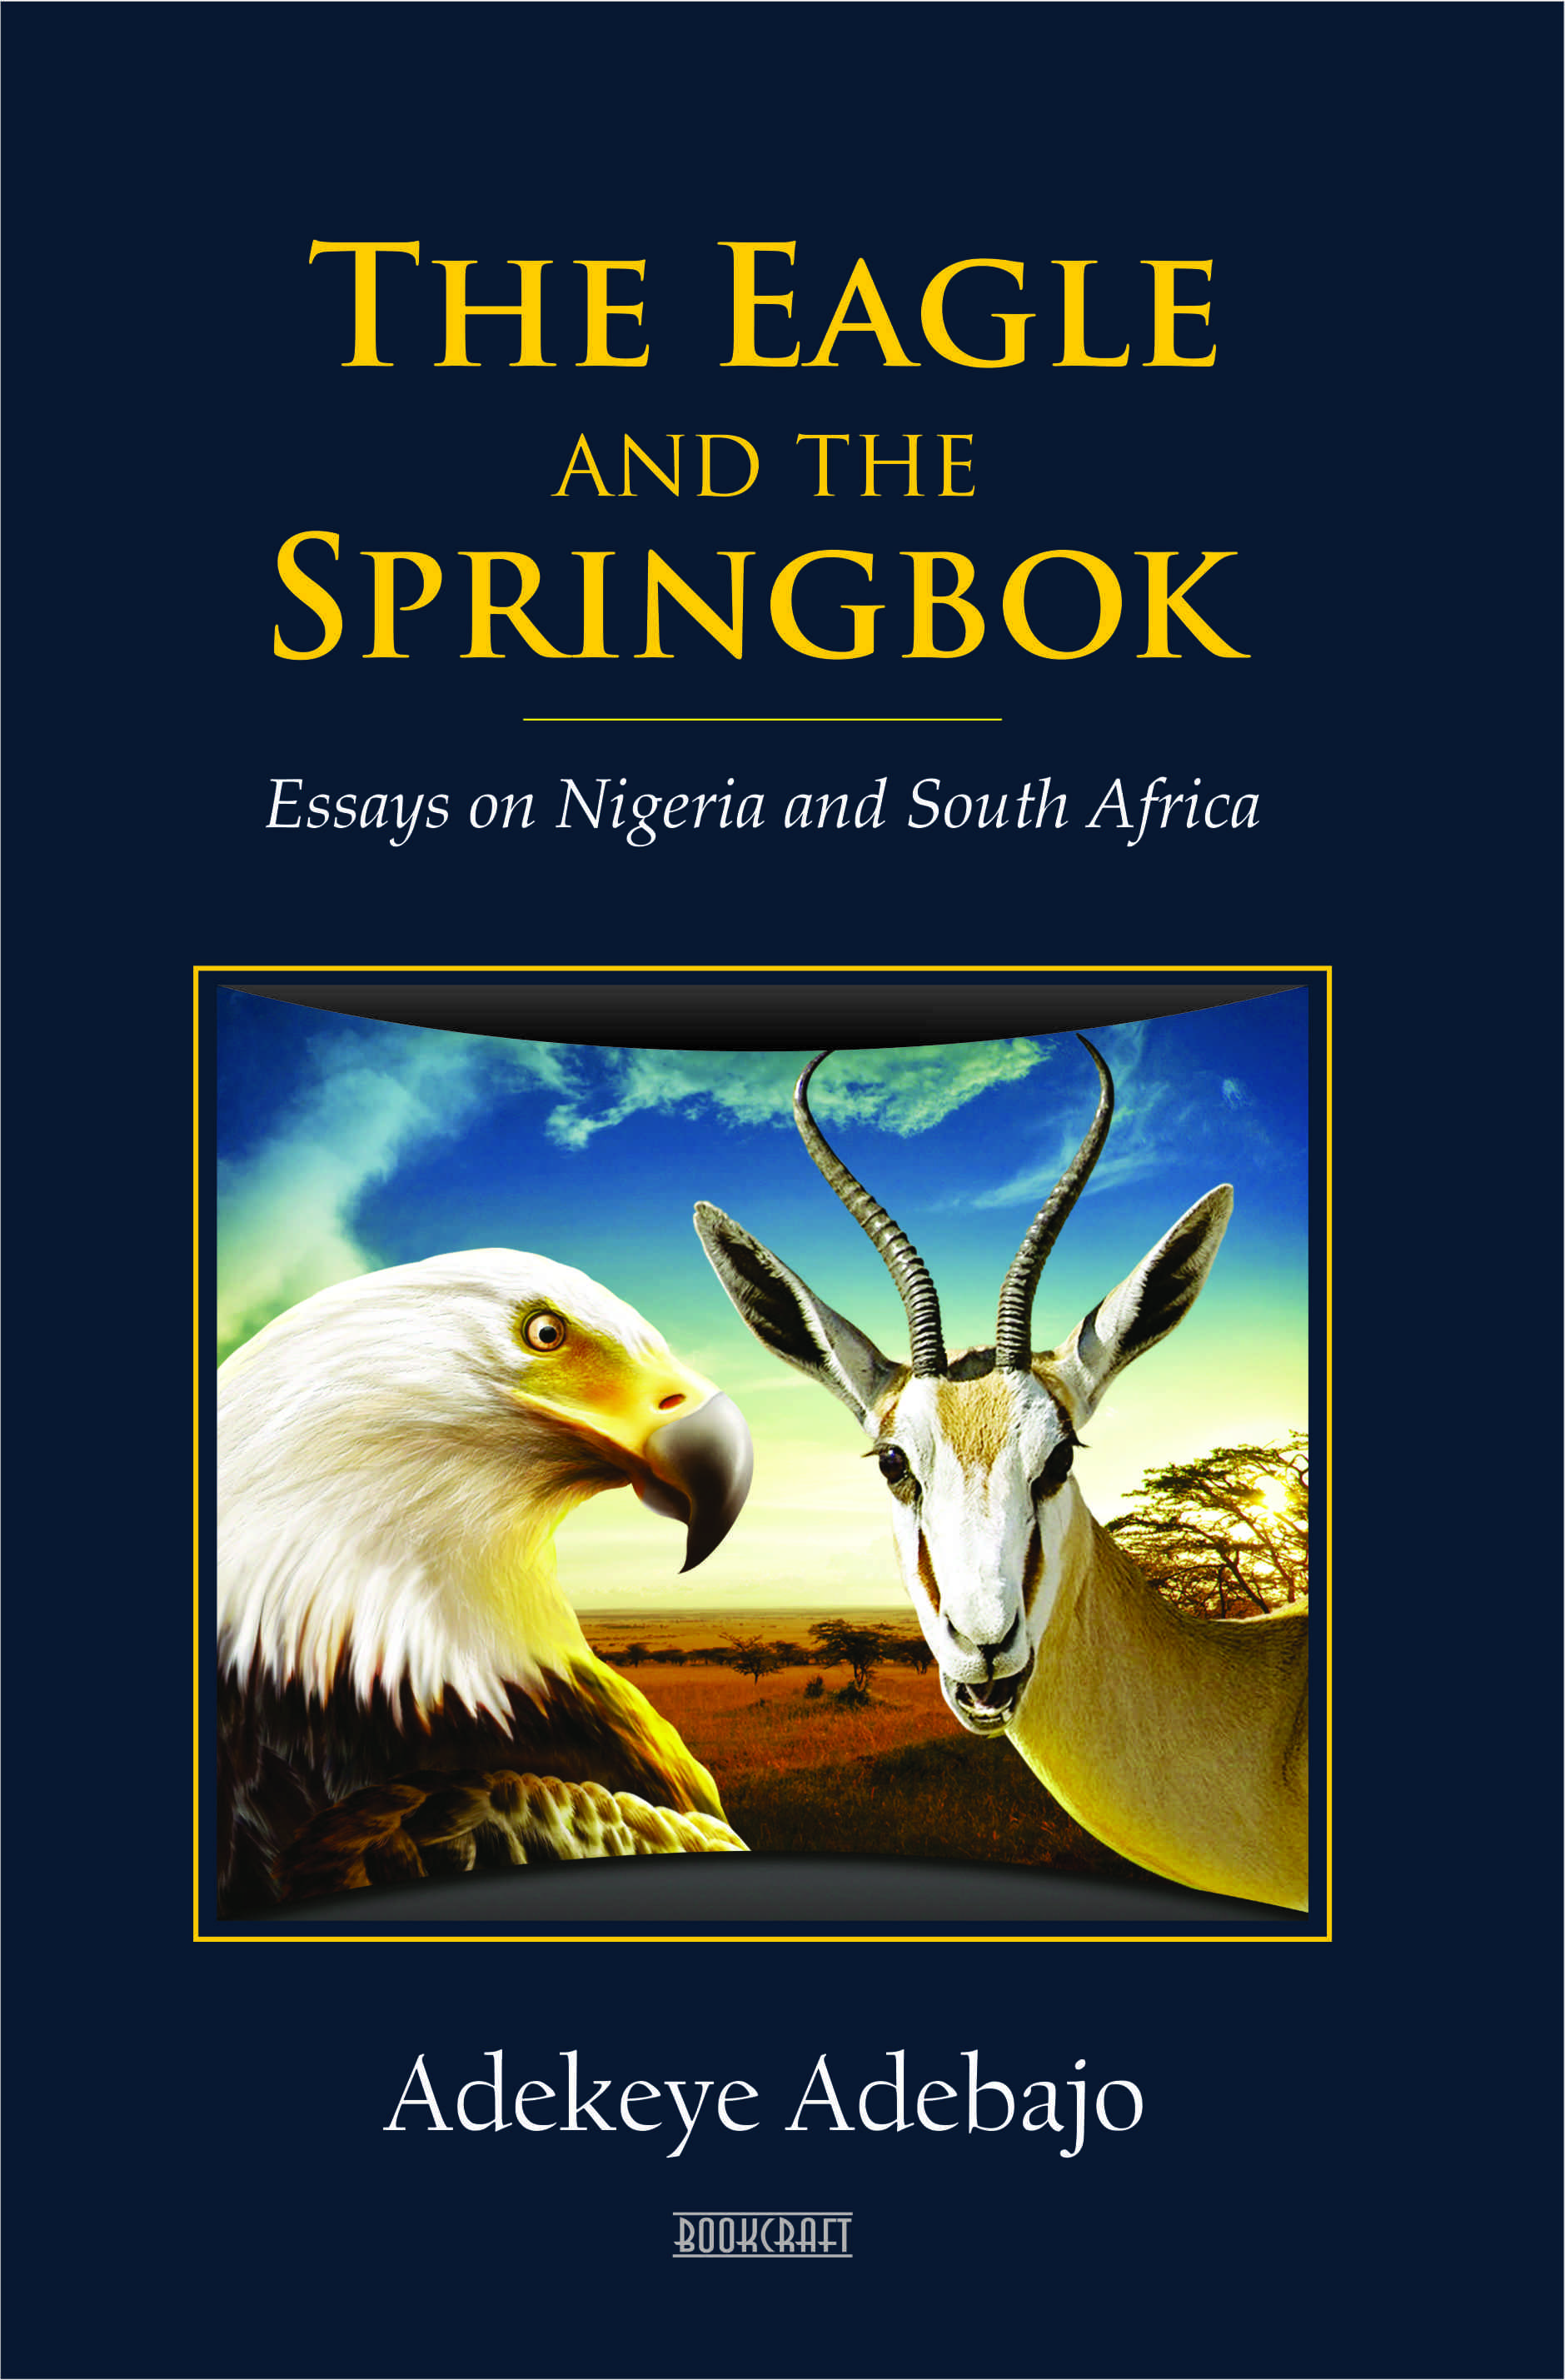 Excerpt from ‘The Eagle And The Springbok by Adekeye Adebajo’